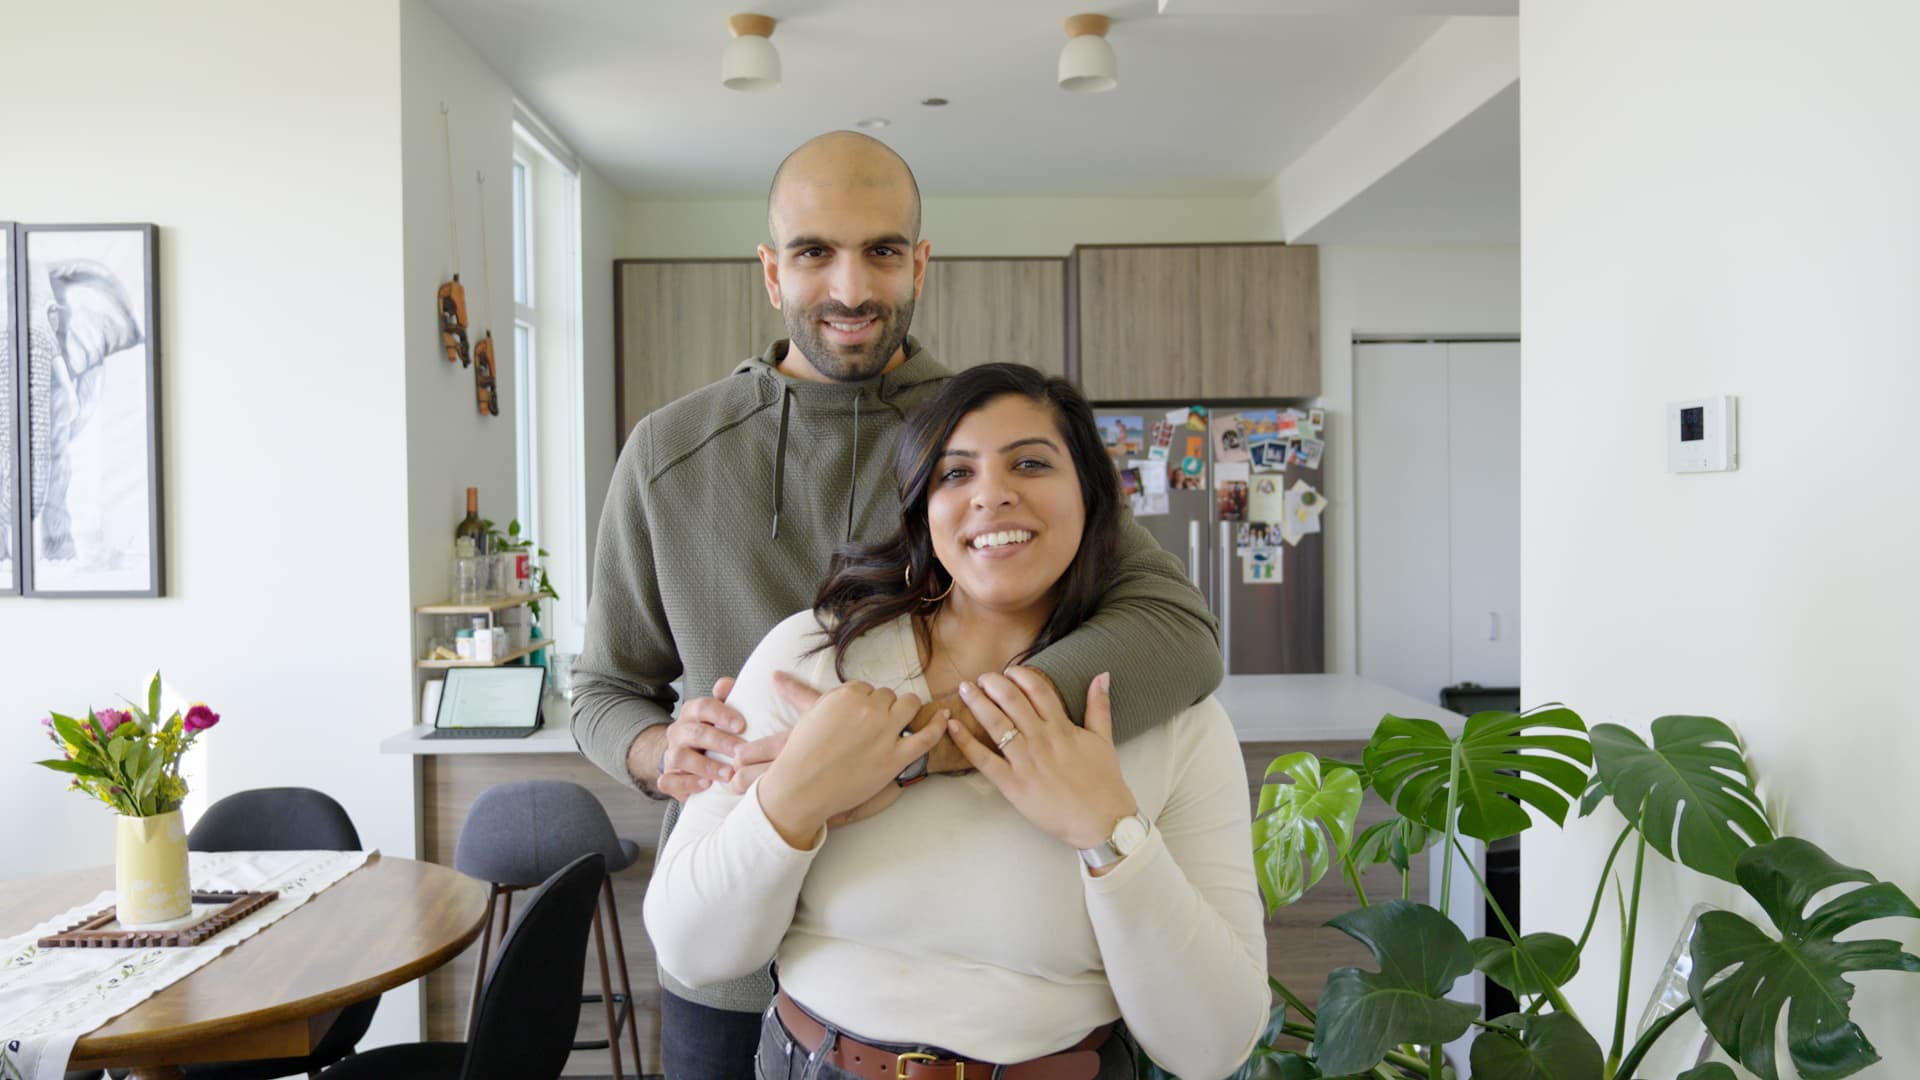 A couple earns $227,000 a year in Chicago and aims to save $2.5 million